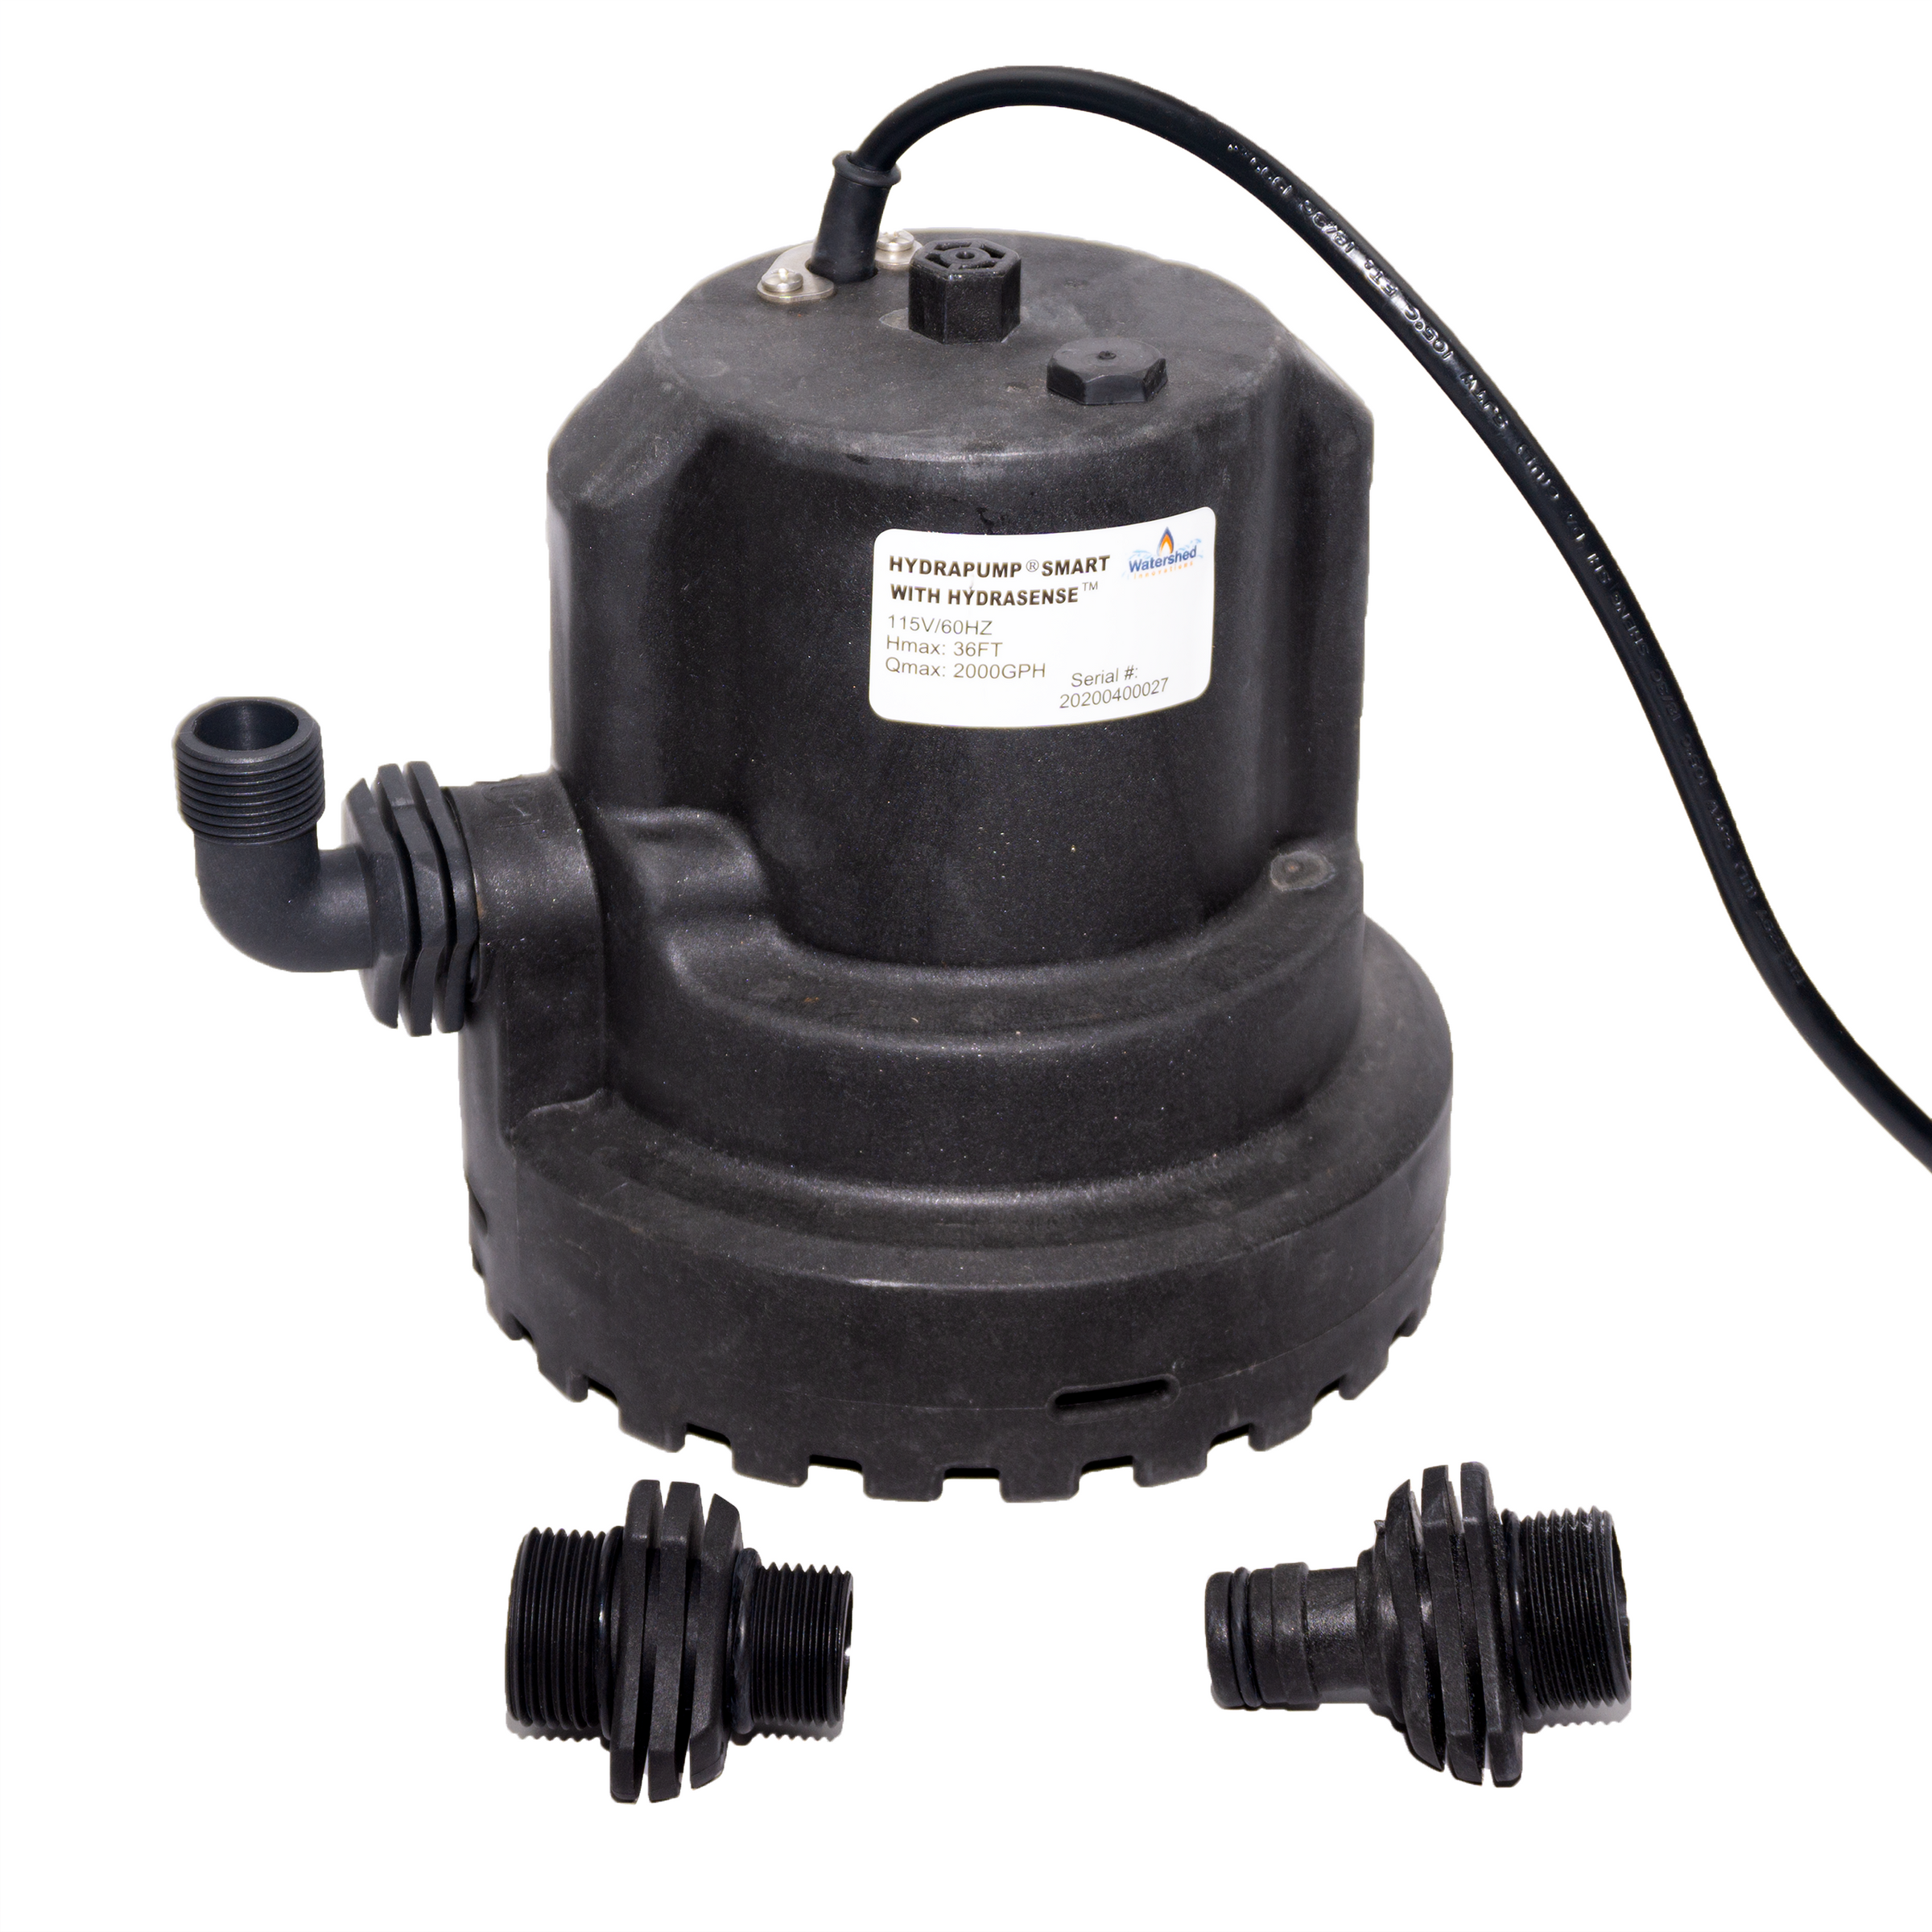 Get Automatic Submersible Water Pump